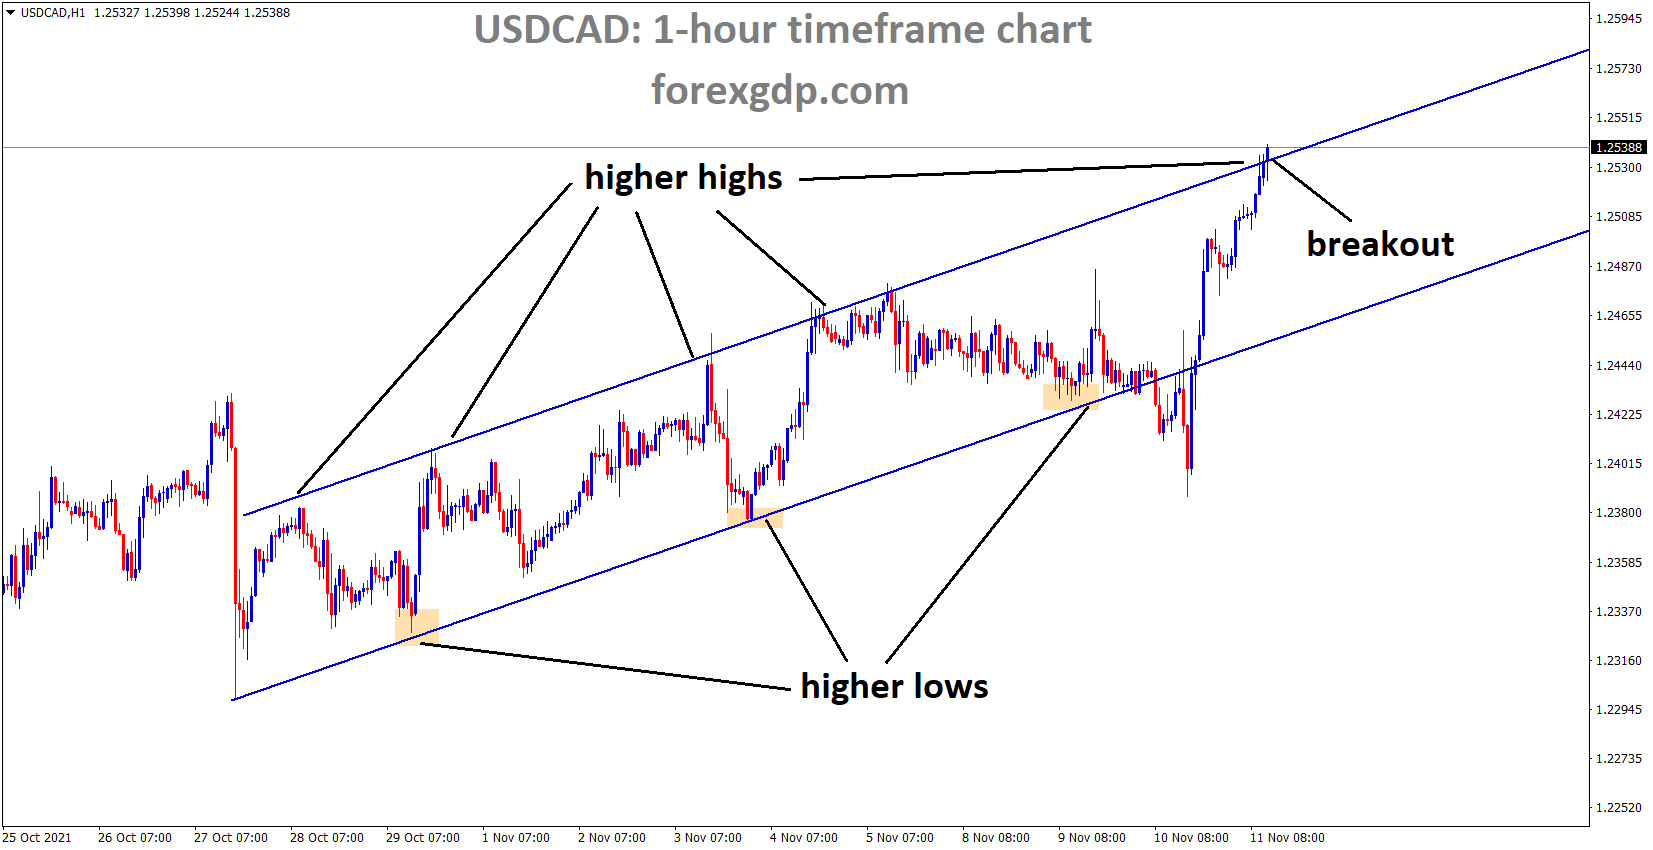 USDCAD is moving in an Ascending channel and the market breaks higher high area of the channel